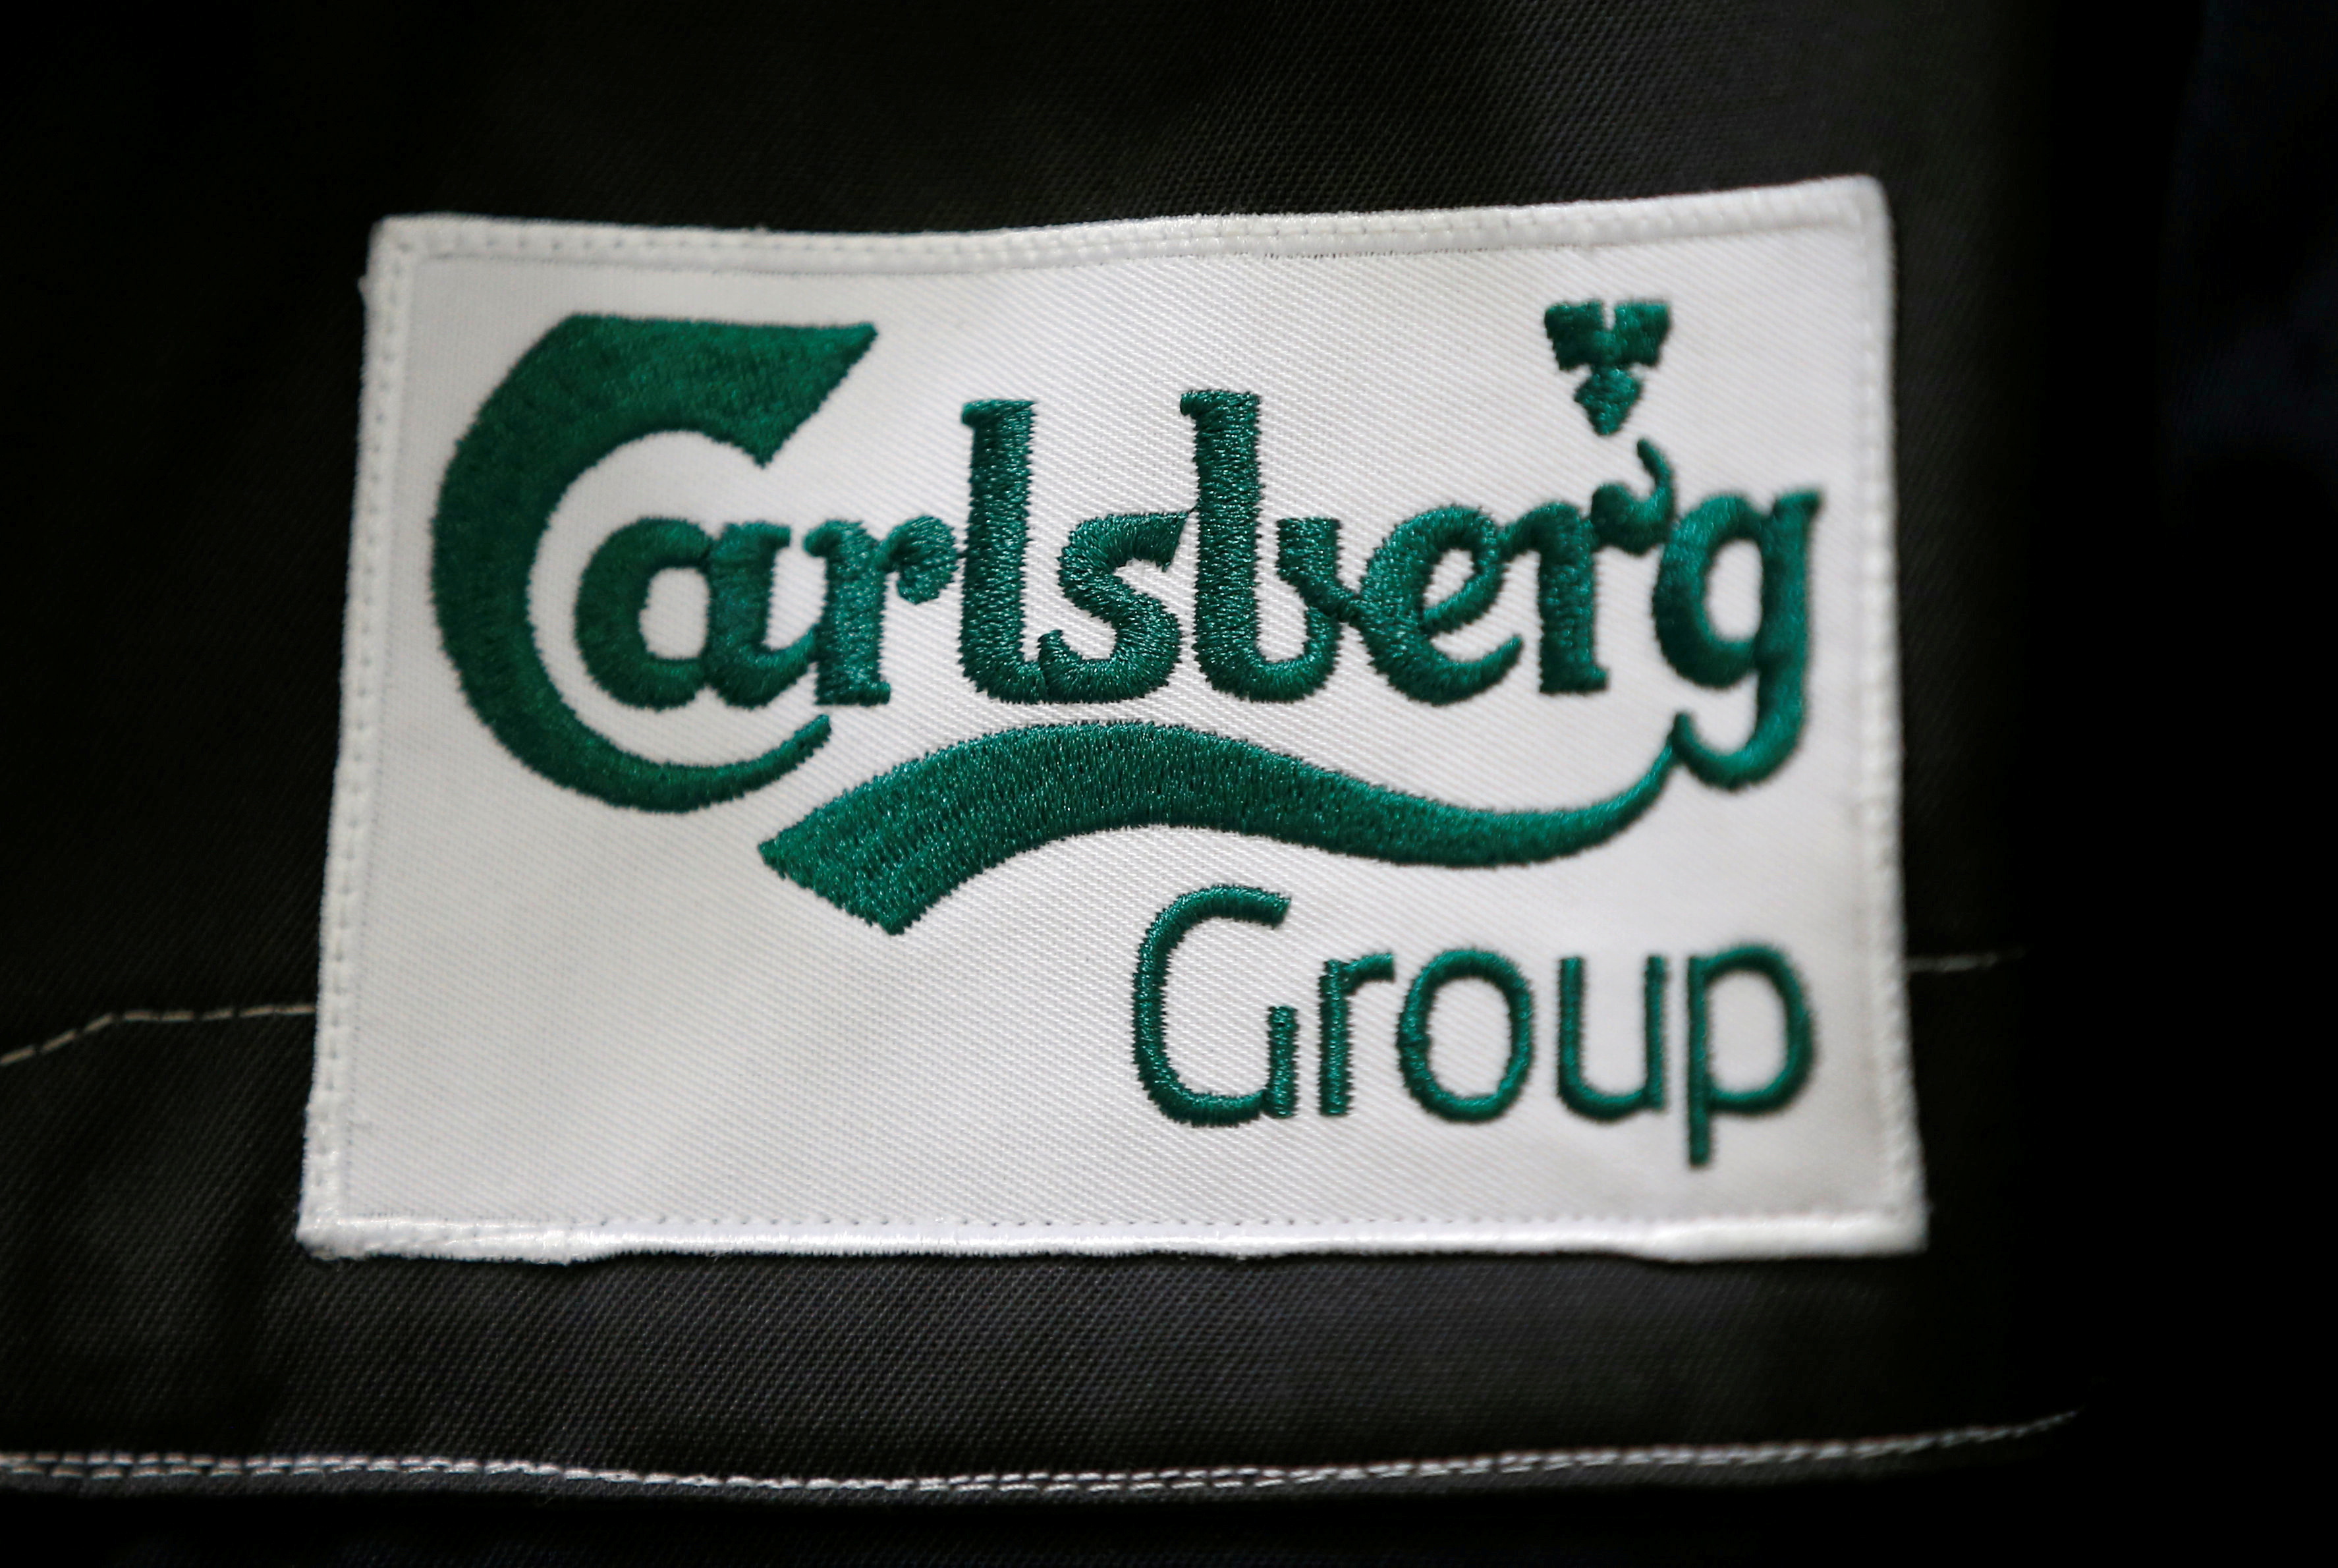 The Calsberg's logo is seen on the jacket of an employee at the development center of the Carlsberg group at the K2 Kronenbourg beer brewery in Obernai